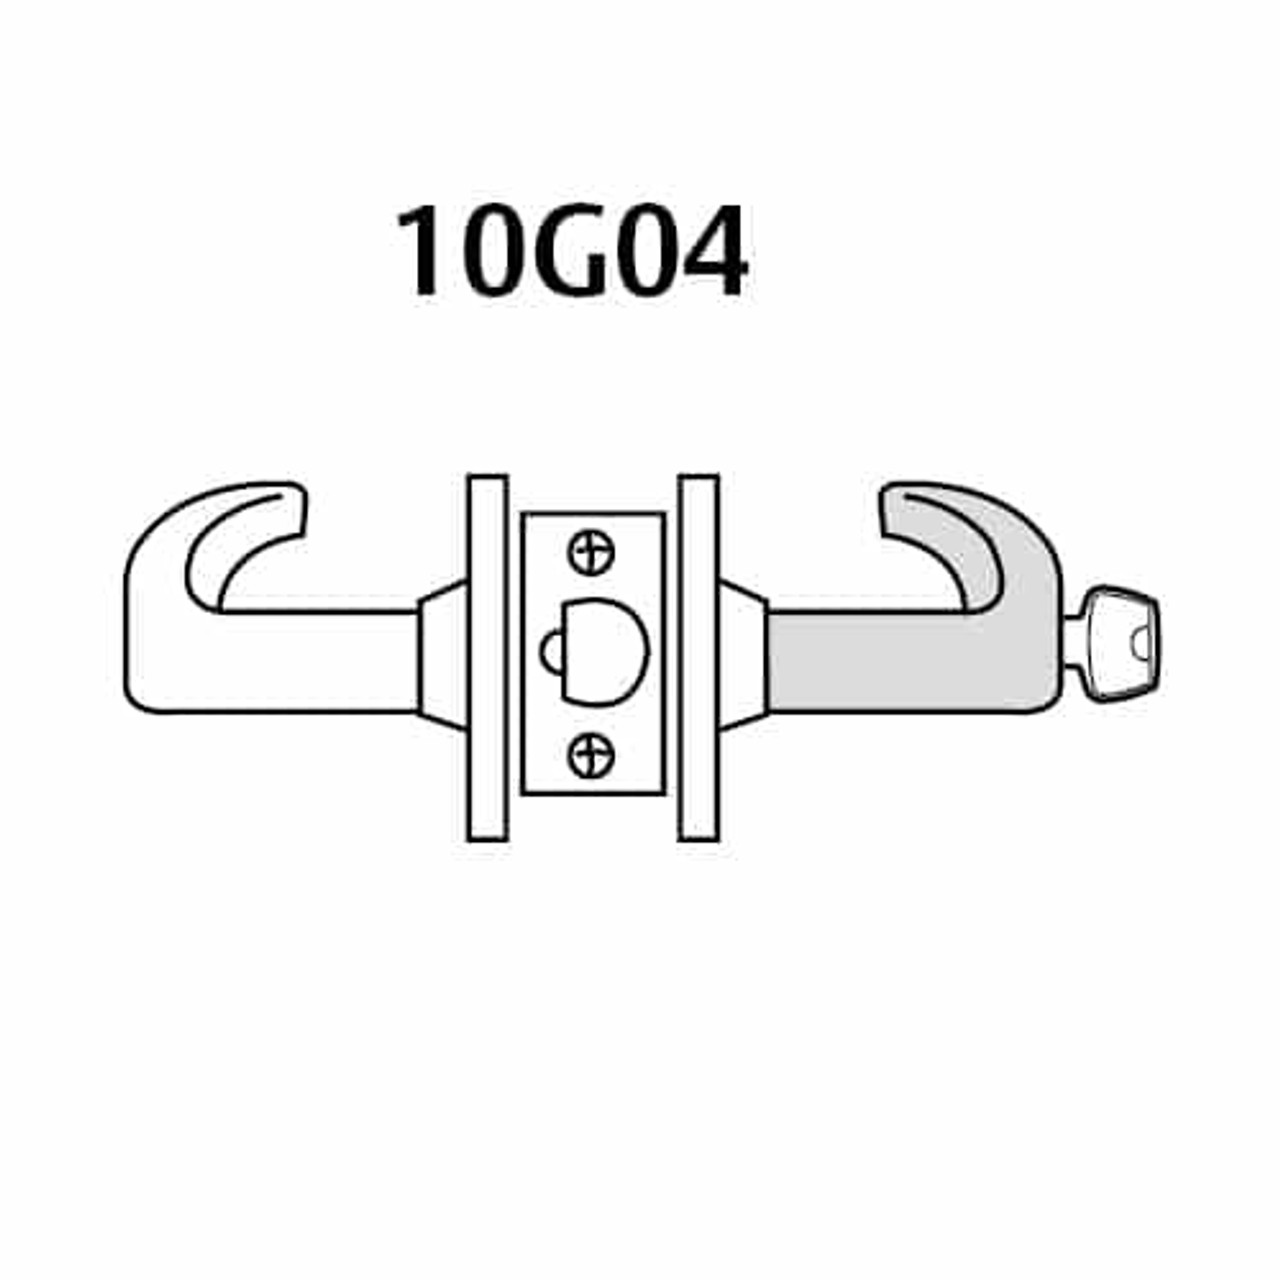 2860-10G04-LL-10 Sargent 10 Line Cylindrical Storeroom/Closet Locks with L Lever Design and L Rose Prepped for LFIC in Dull Bronze